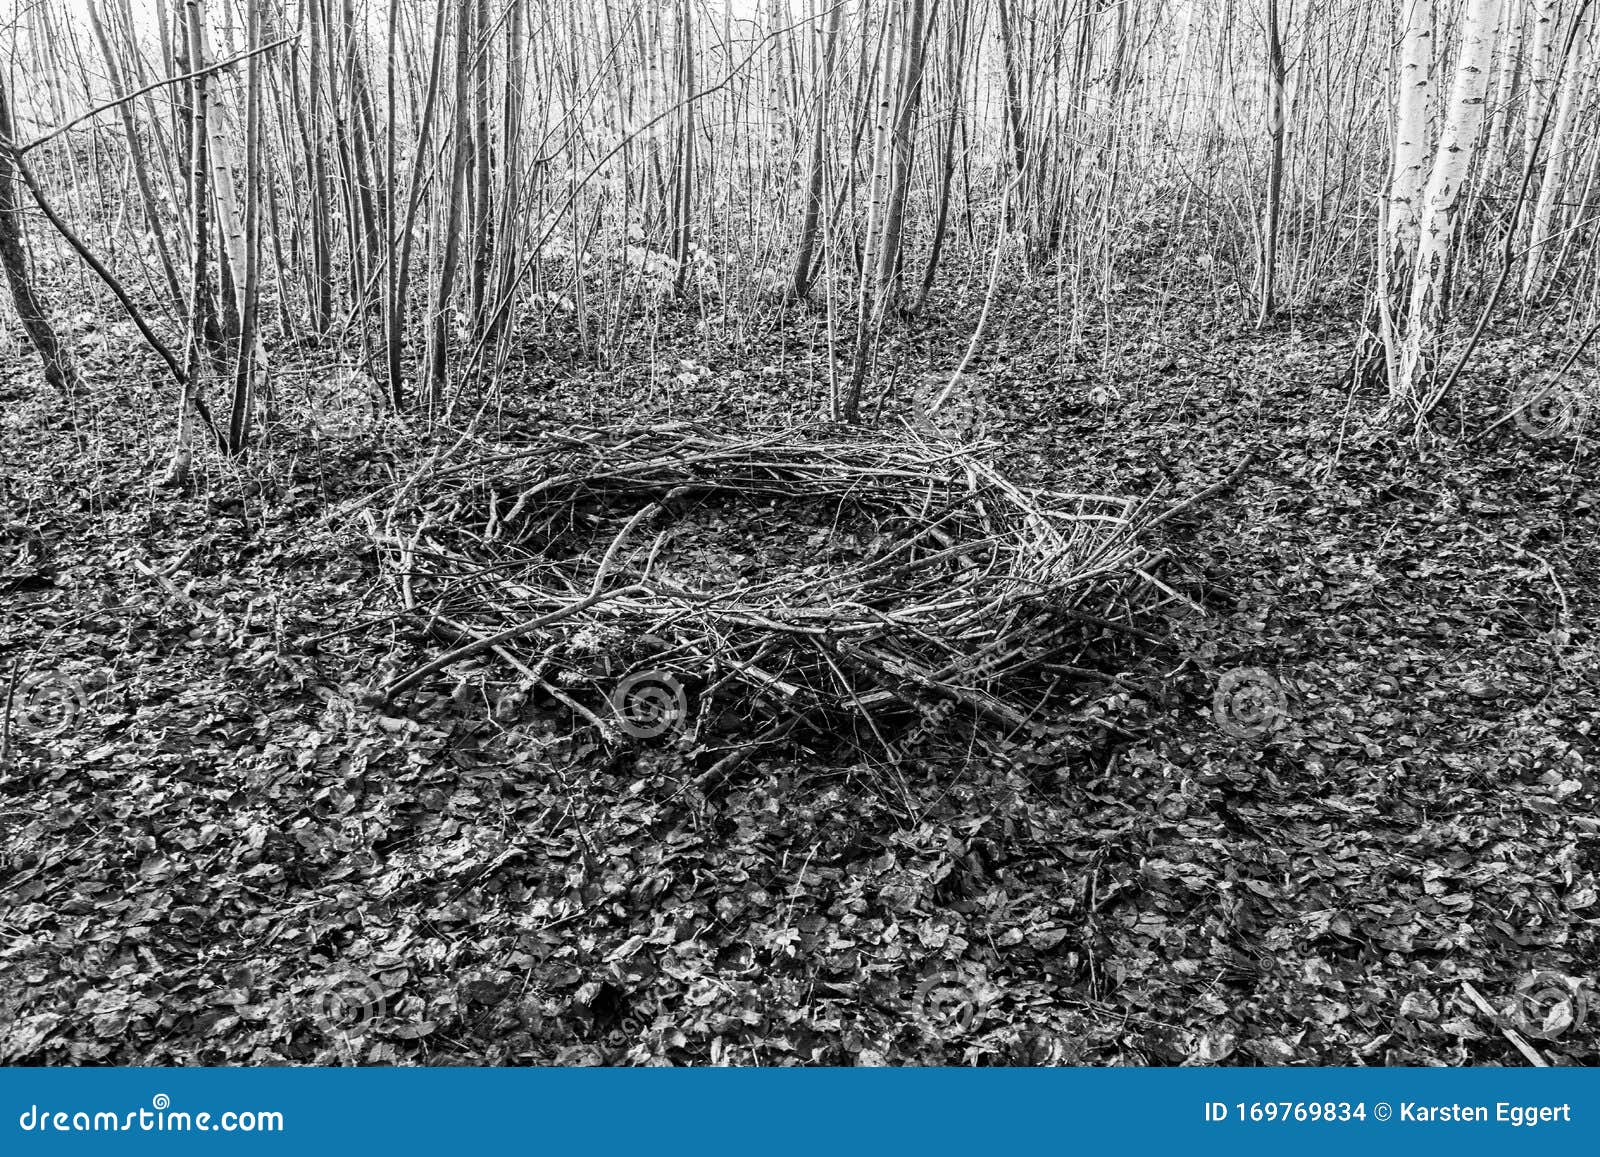 A Forest Lies a Mysterious Circle of Branches, Which Looks Like a Cult